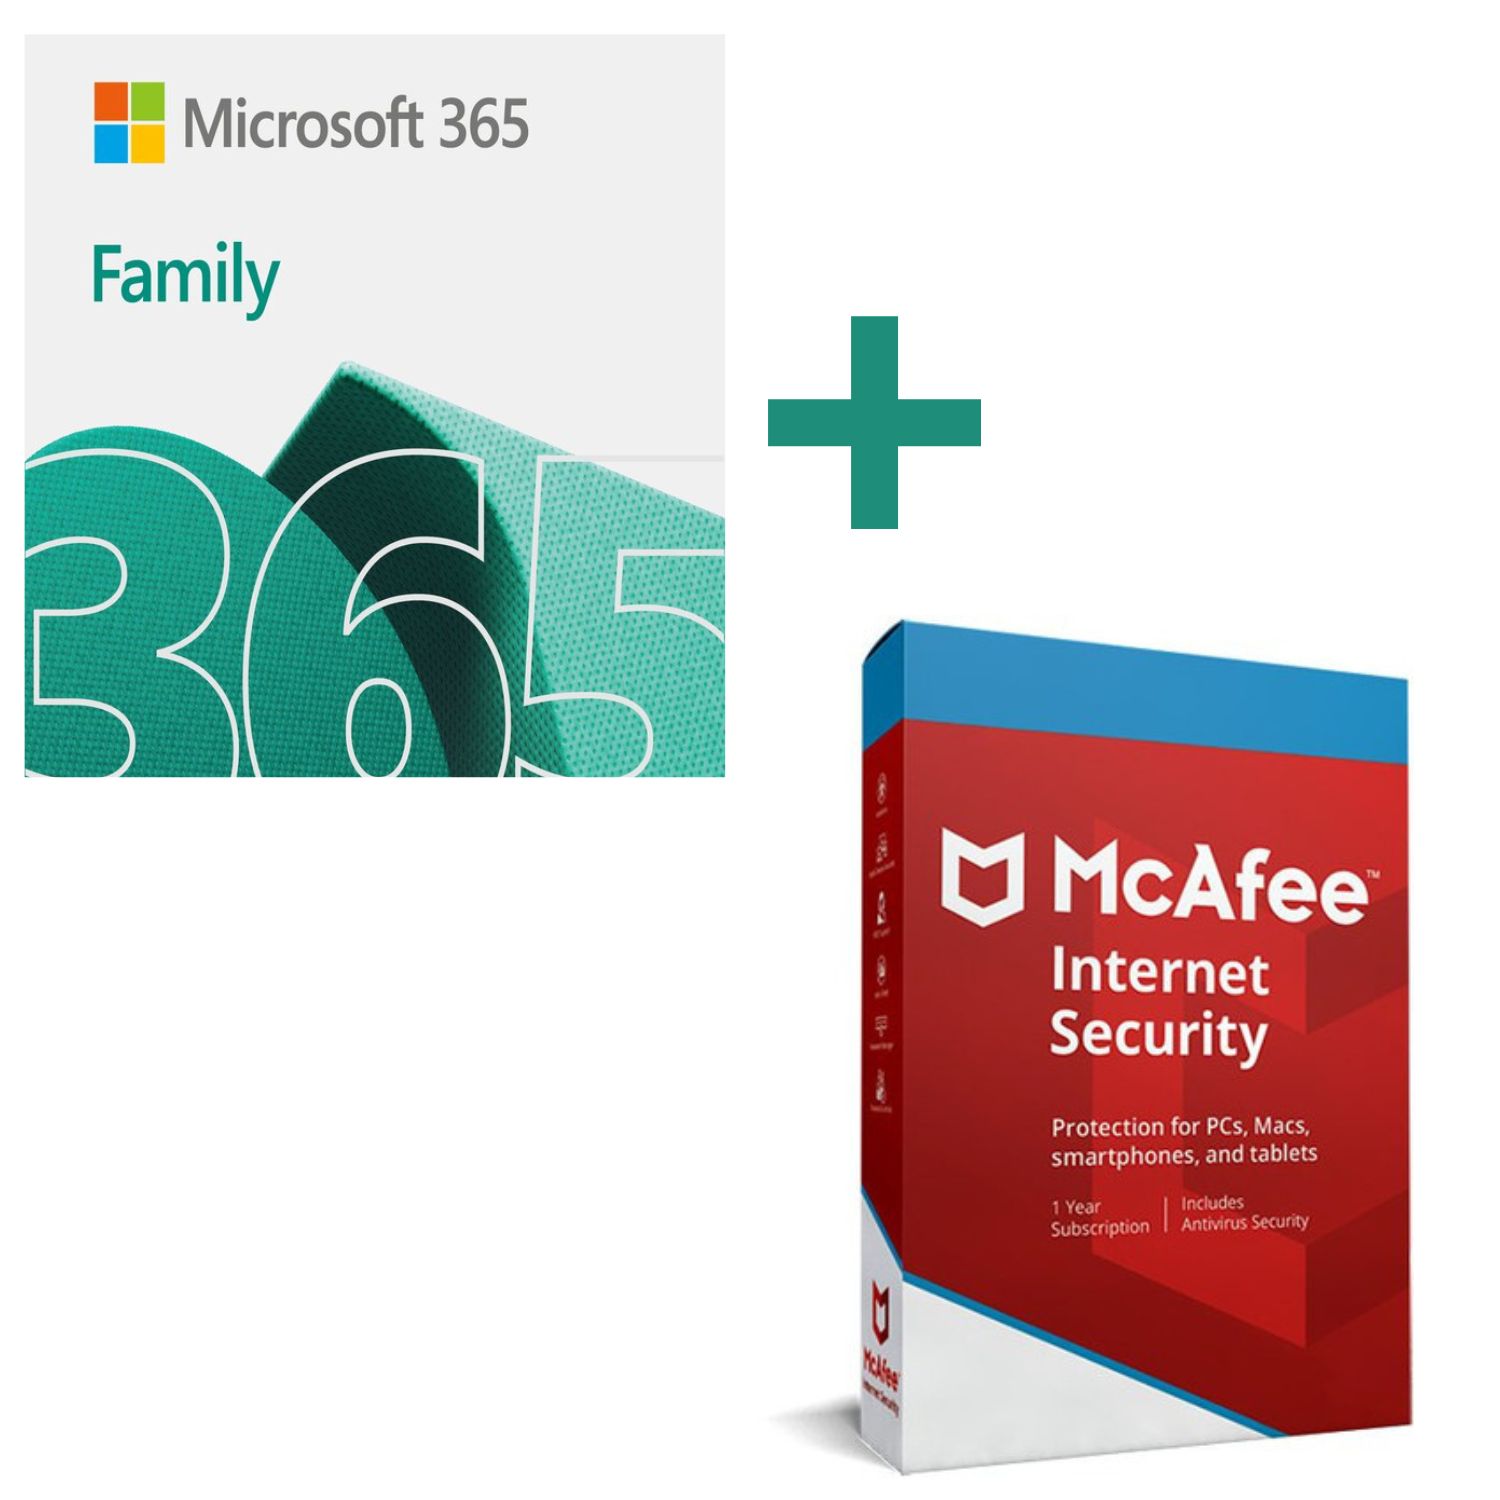 PROMO: Office 365 Family + Mcafee Int Security 5PC (Digital)